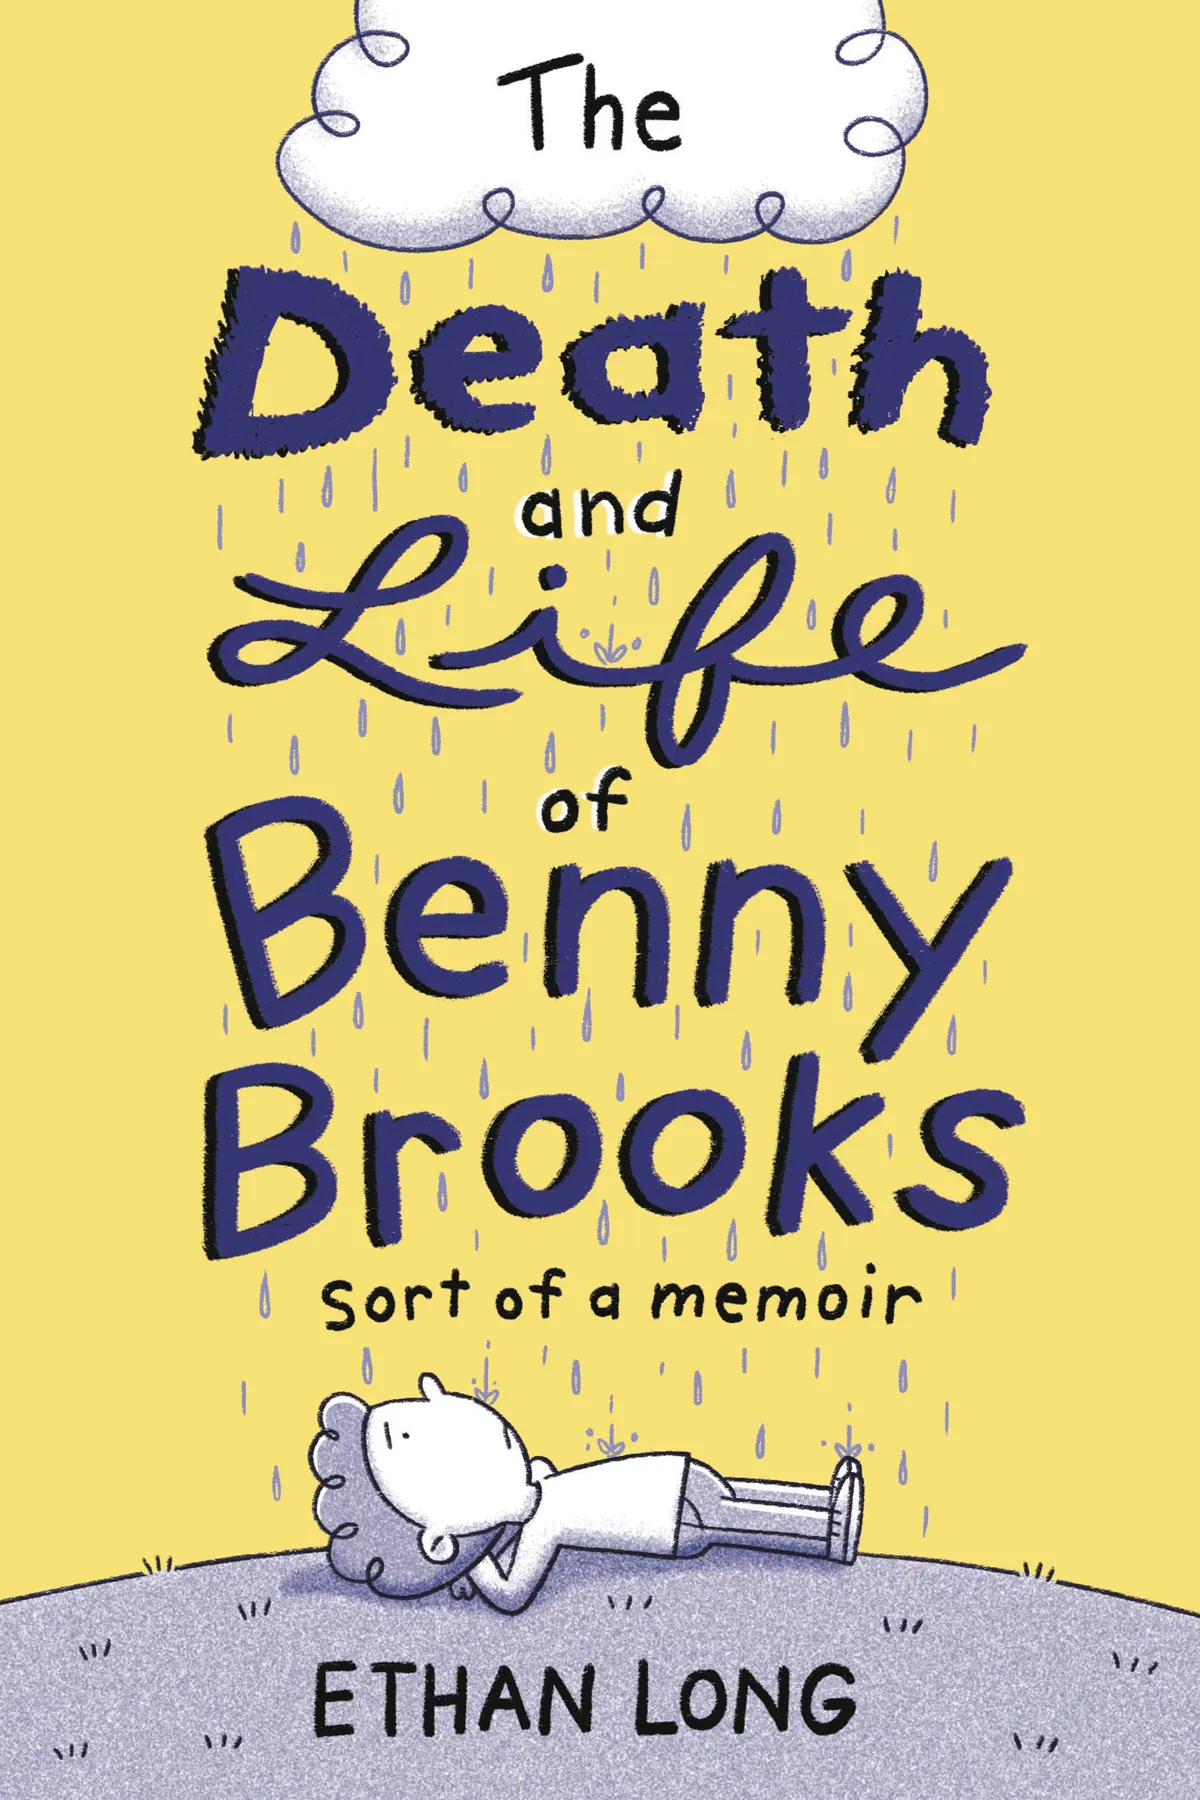 The Death and Life of Benny Brooks: Sort of a Memoir